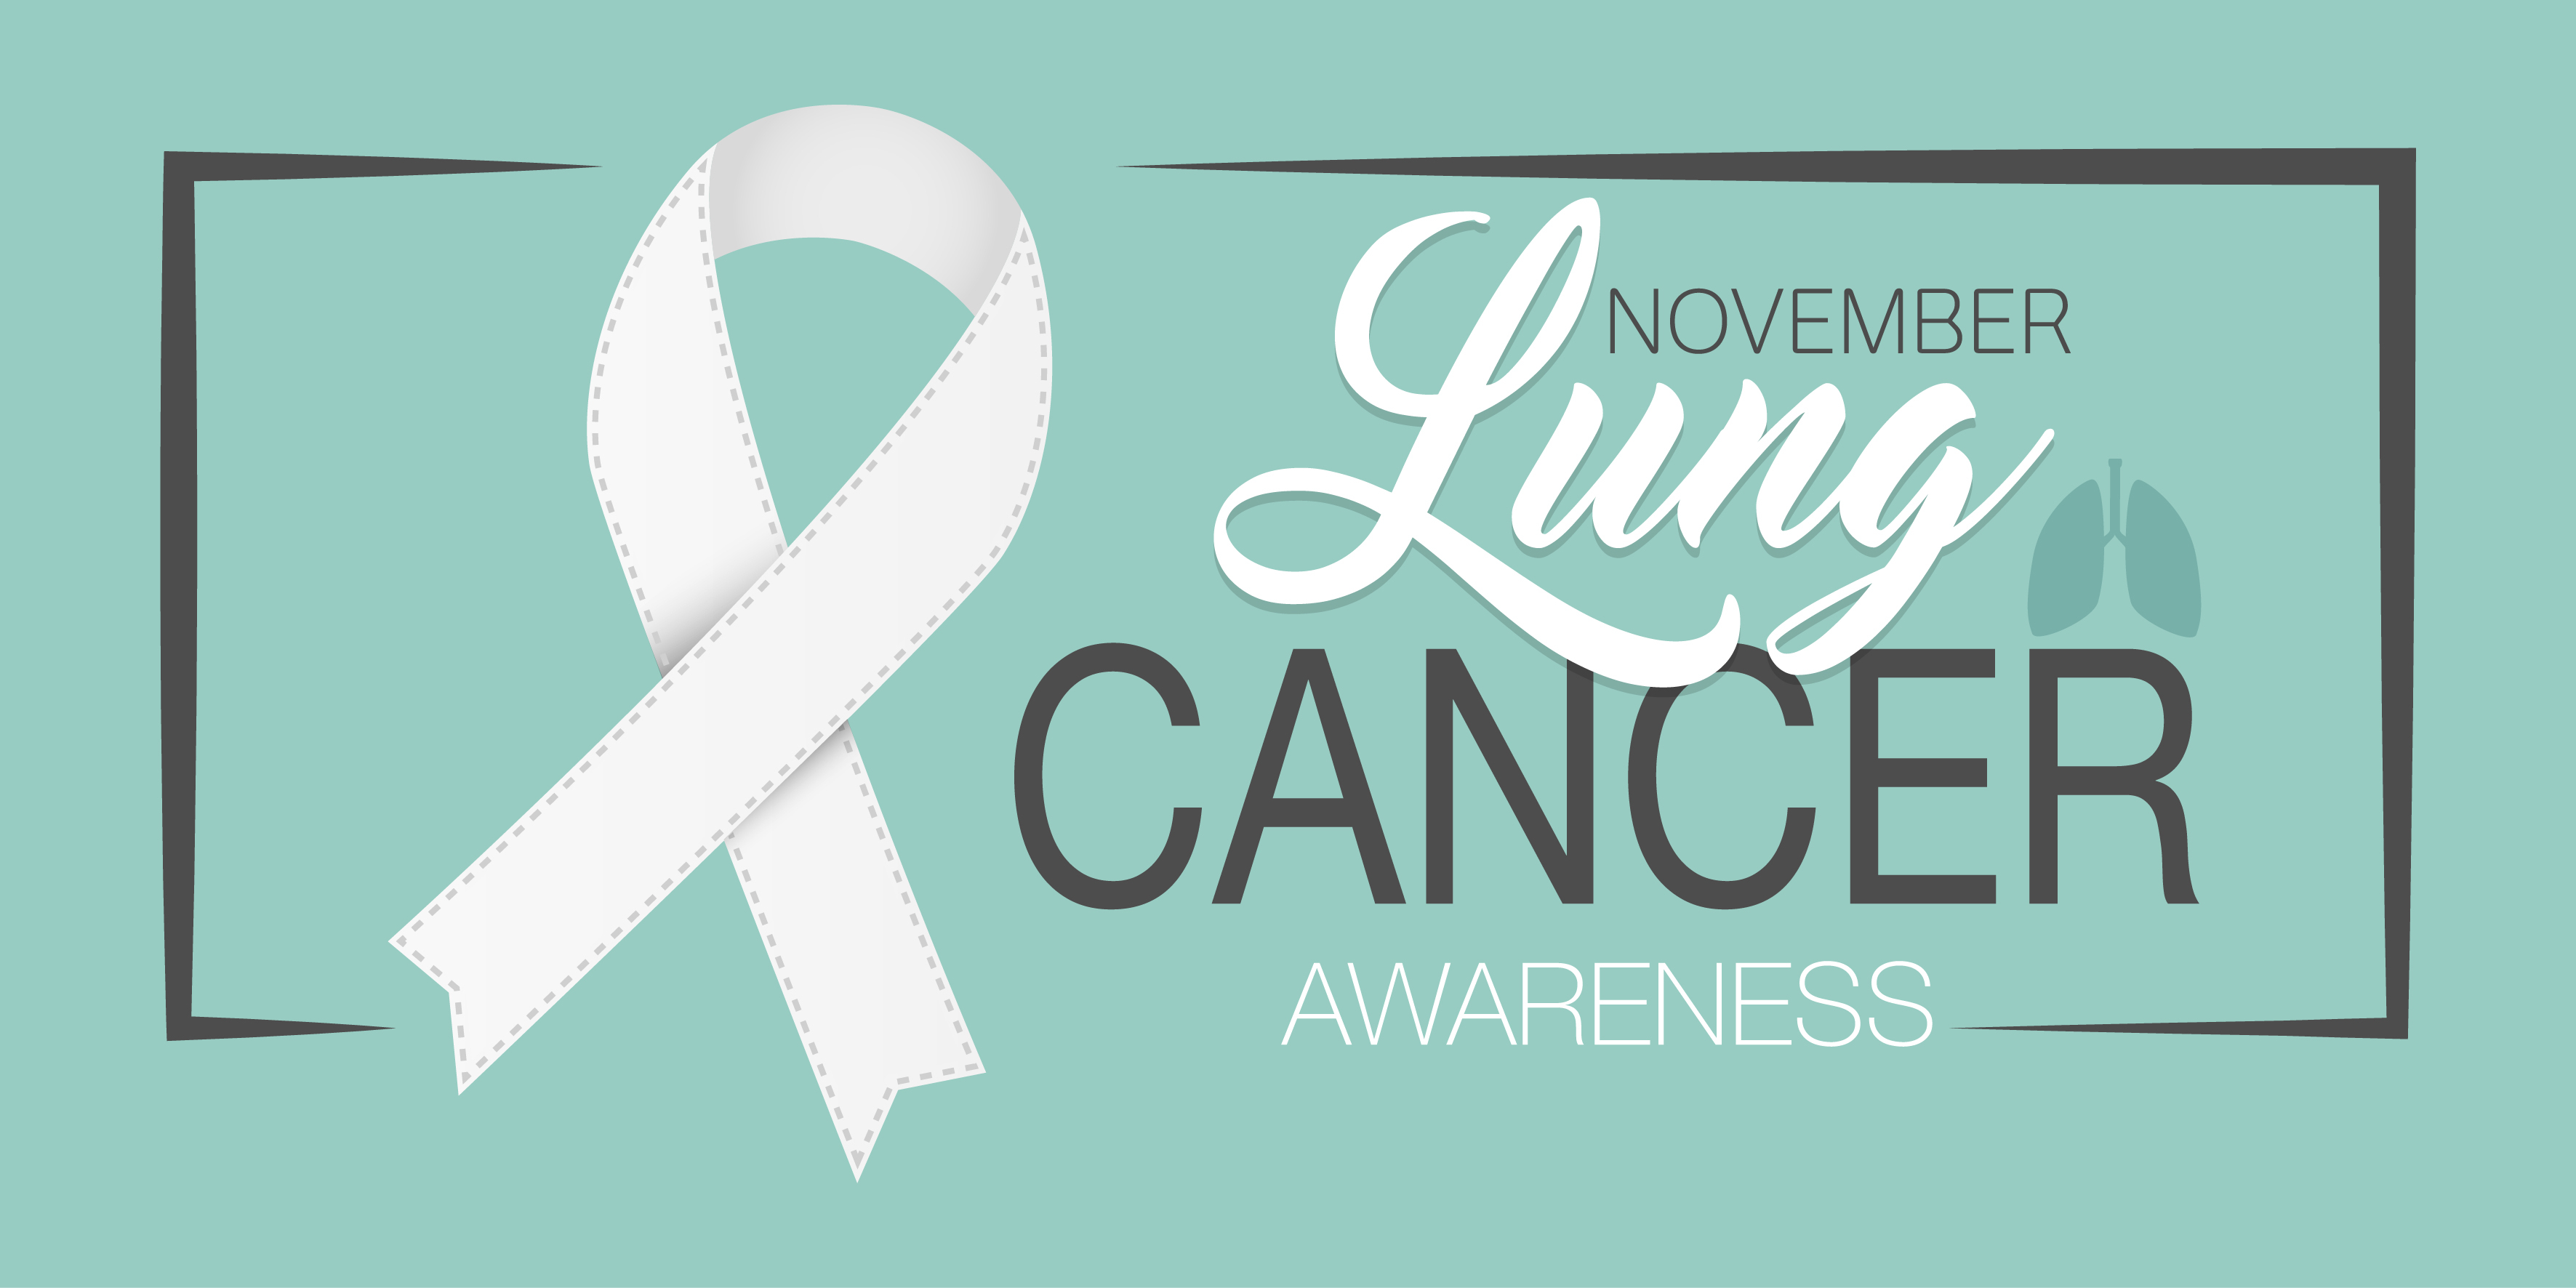 This month is Lung Cancer Awareness Month!